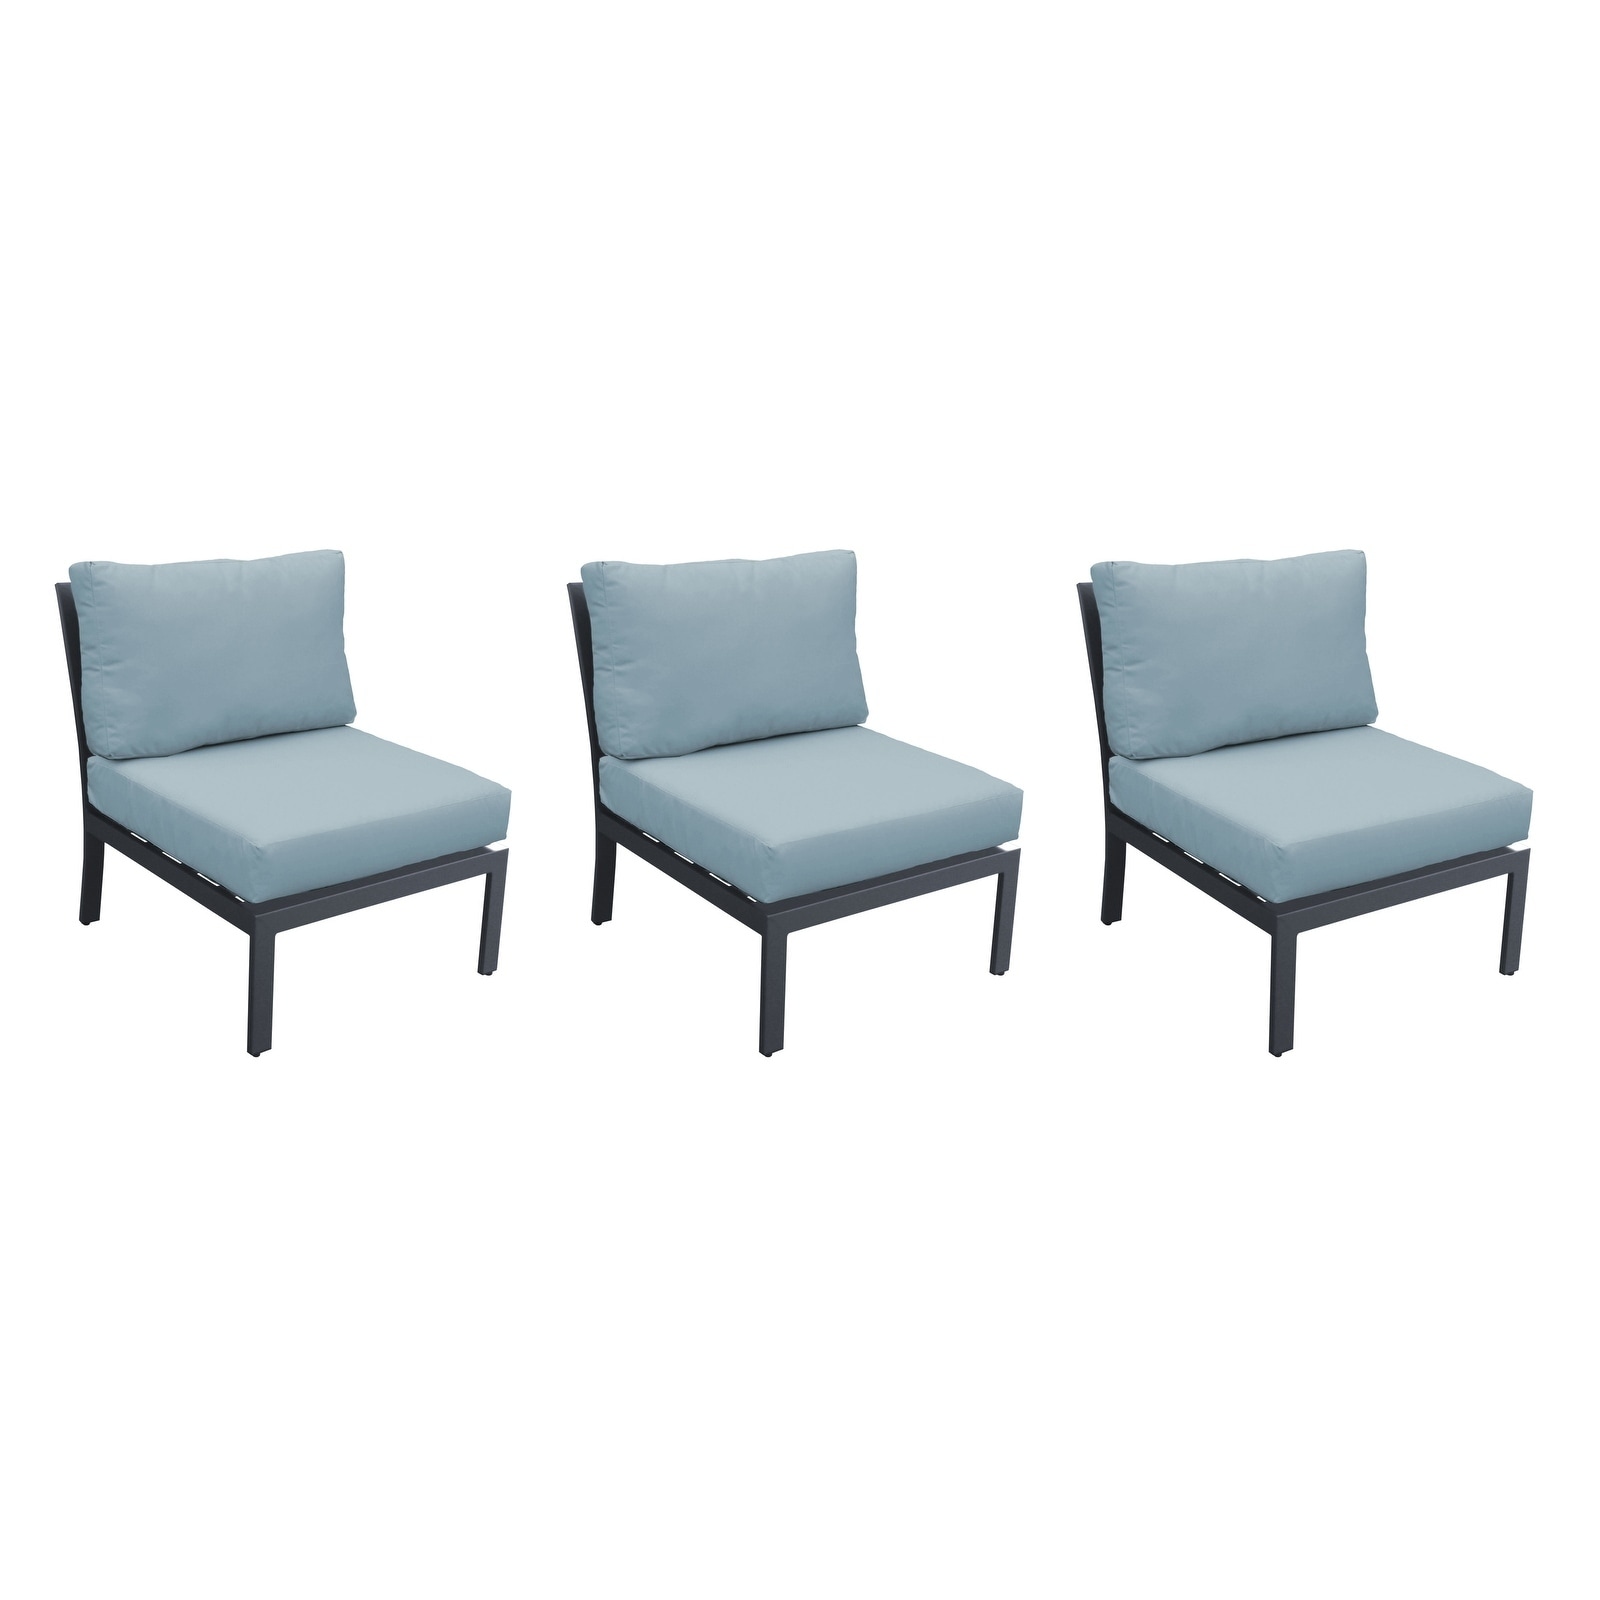 Moresby Armless Sofa (set Of 3) By Havenside Home